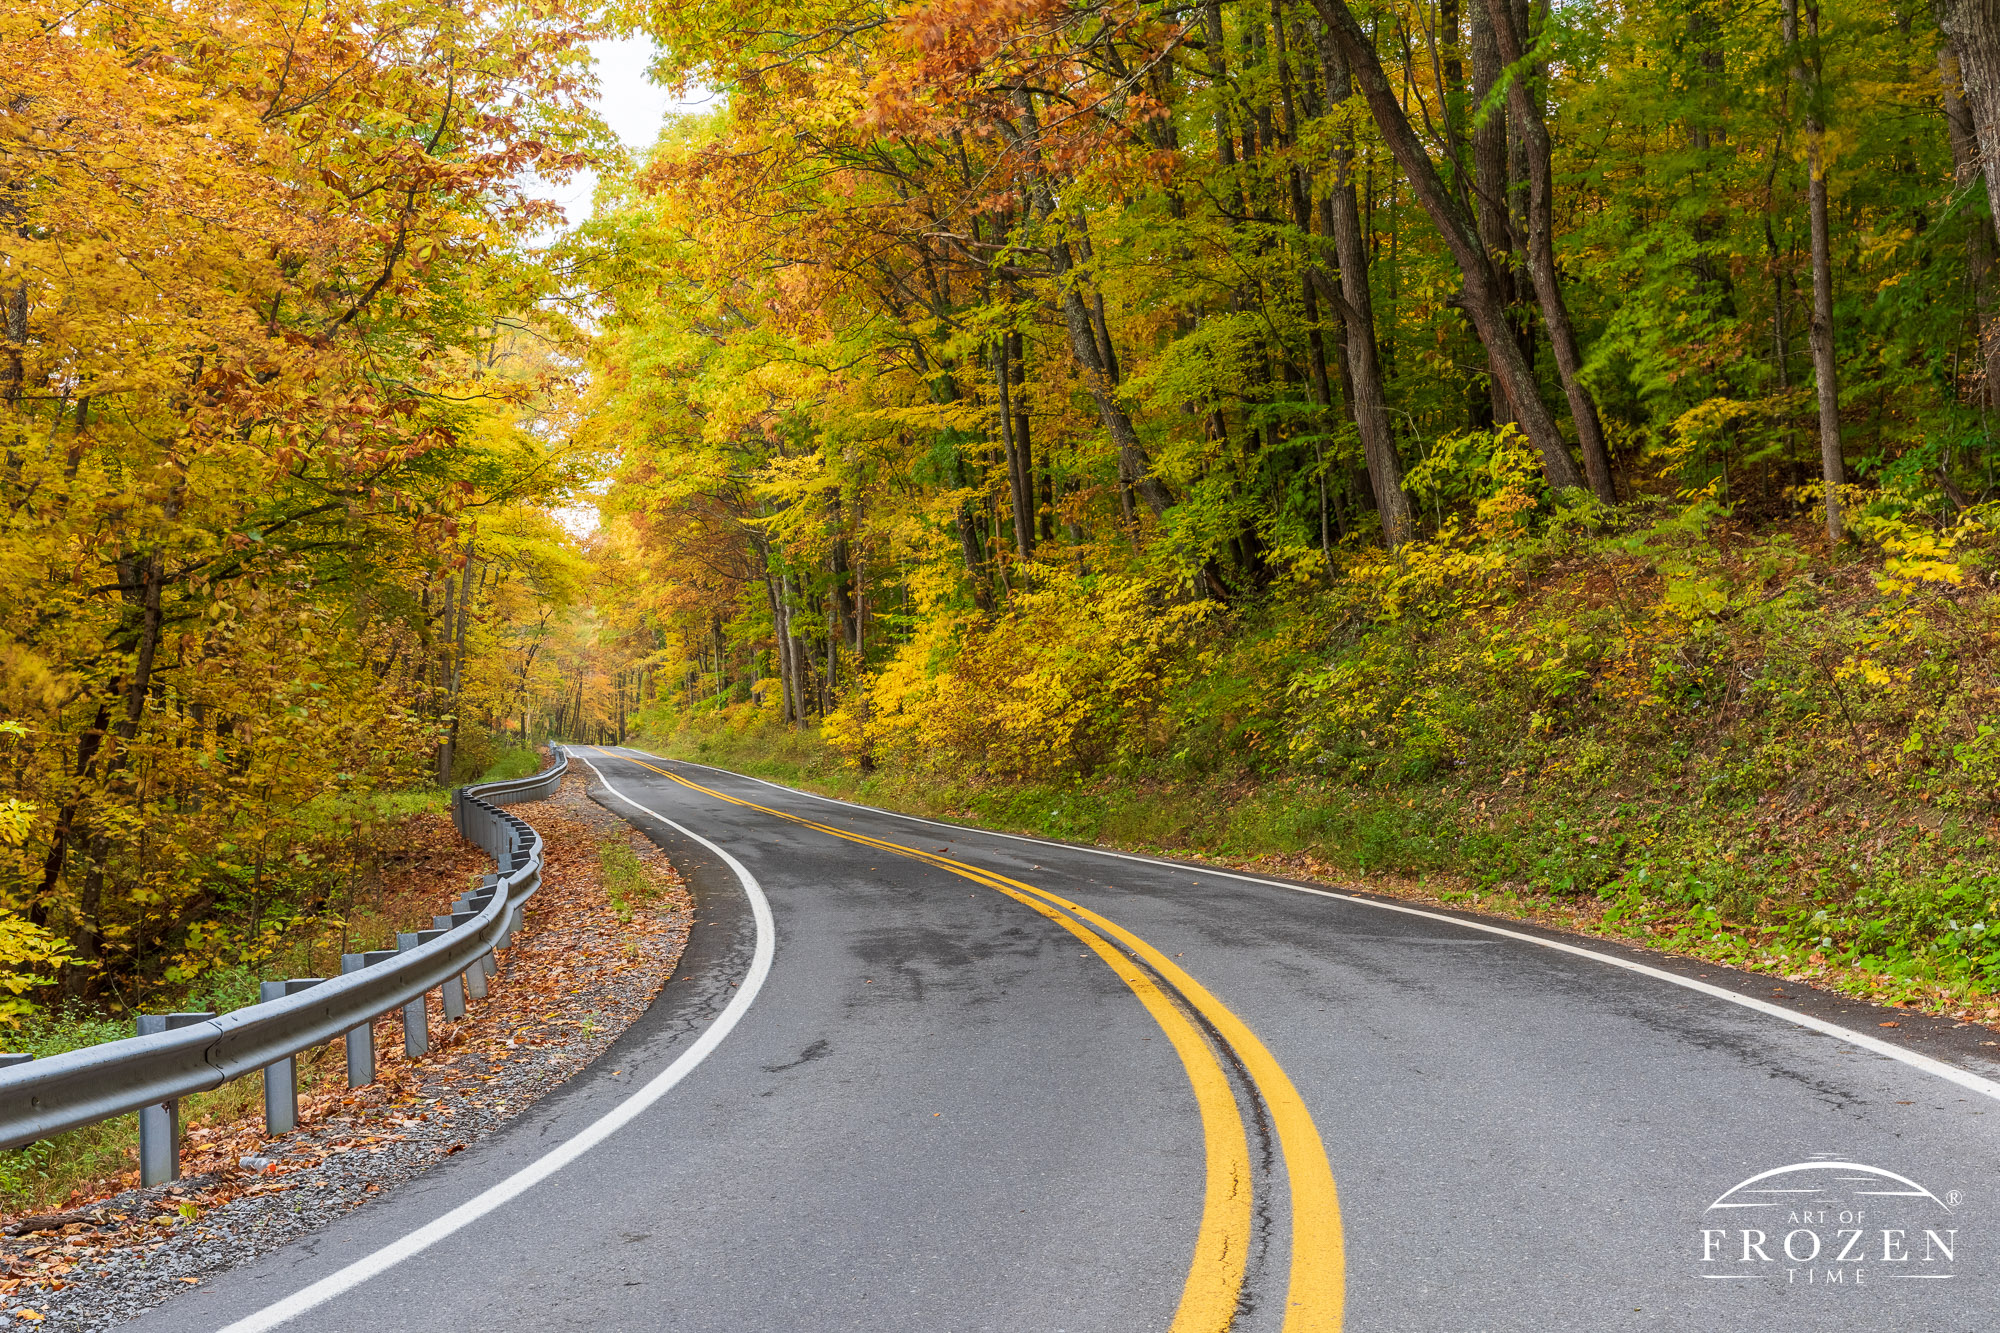 West Virginia Fine Art Photography featuring the state’s peaceful country roads during a colorful autumn day